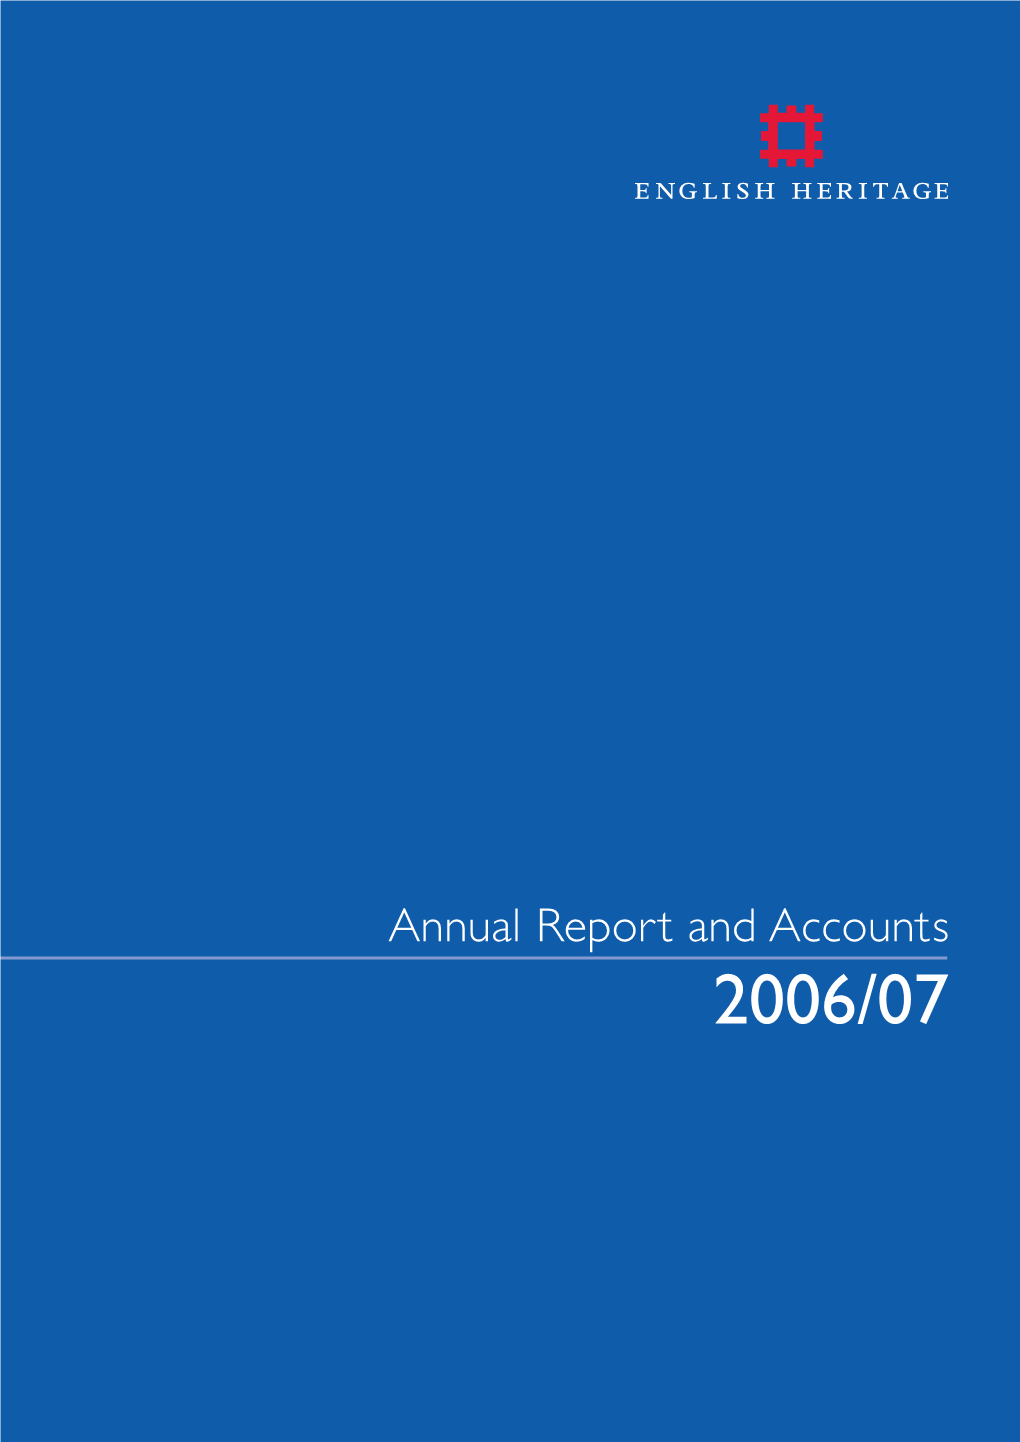 English Heritage Annual Report and Accounts 2006/07